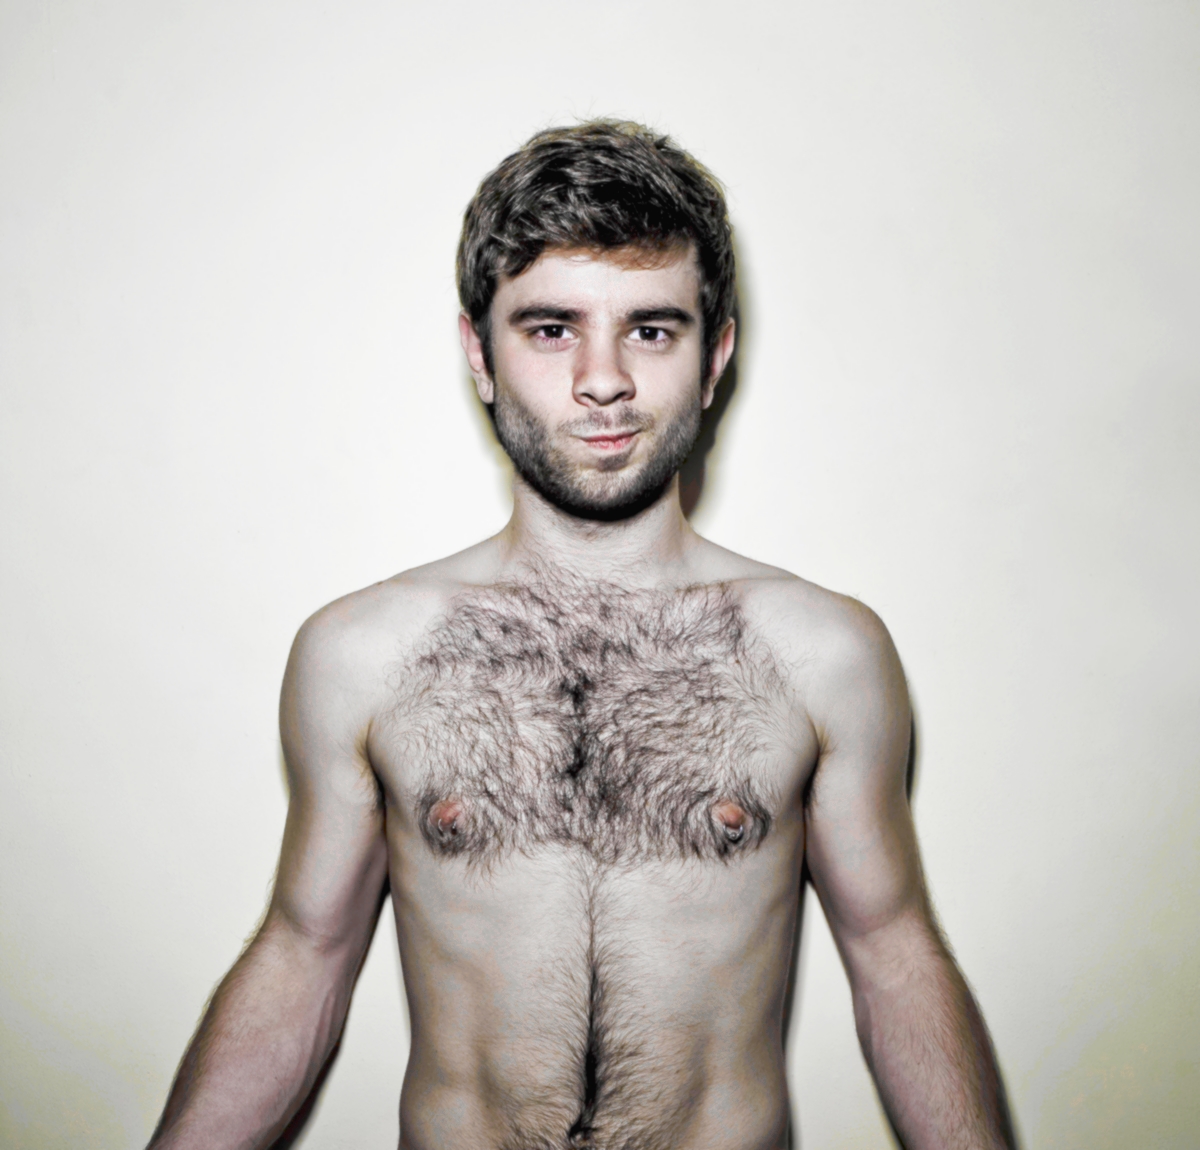 Some people love chest hairs, some people don't. 